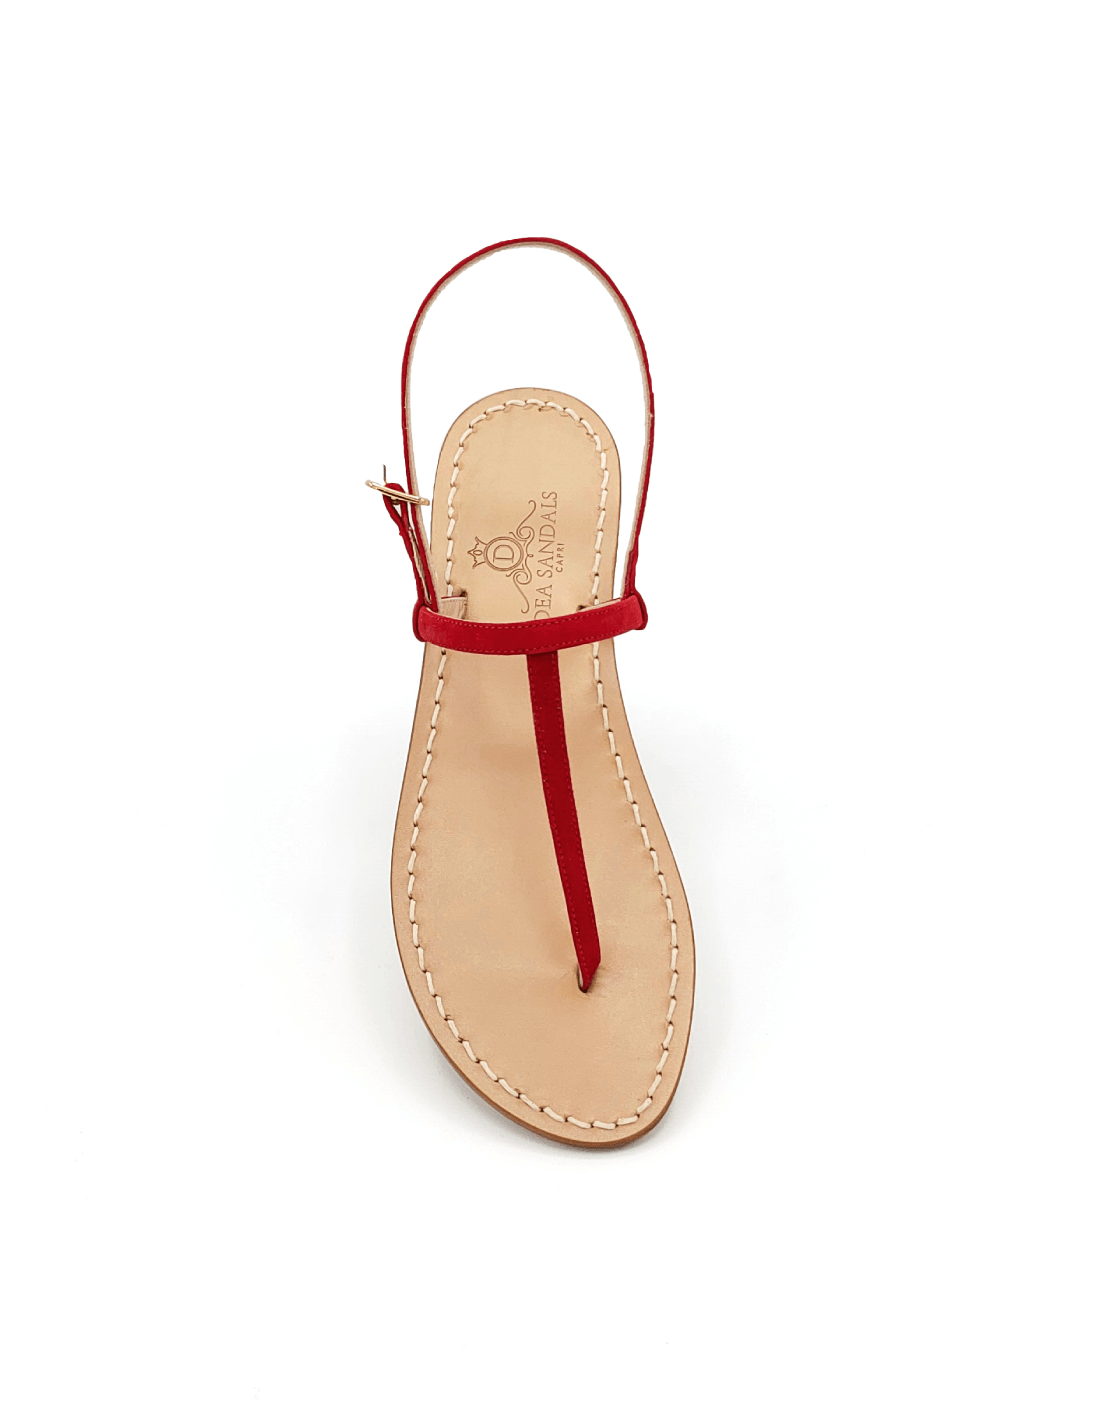 Piazzetta red suede leather Sandals straps in red suede leather lined